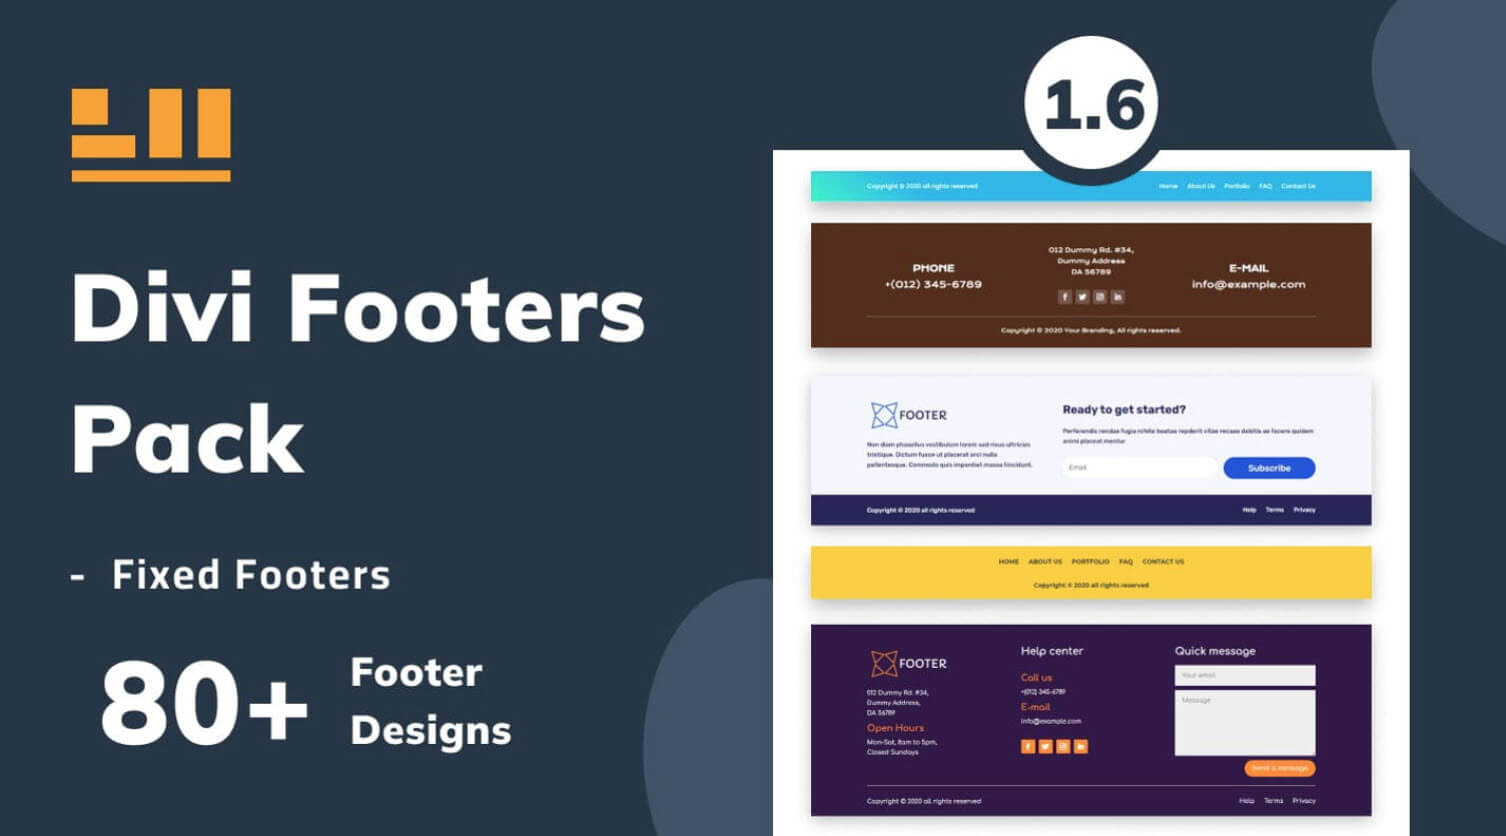 Where to Purchase Divi Footers Pack